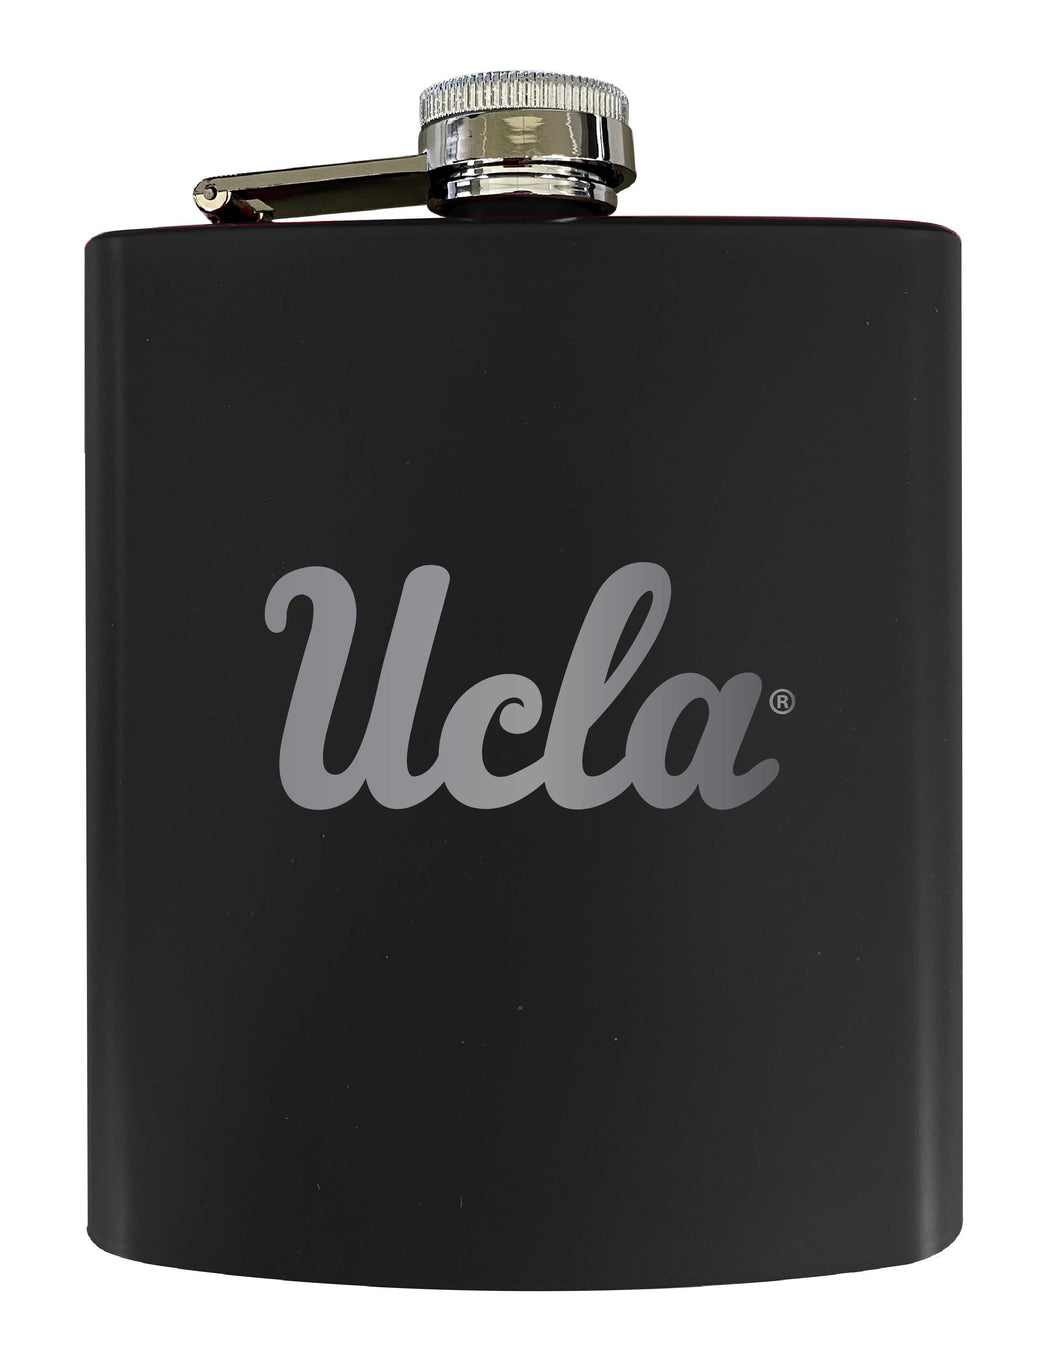 UCLA Bruins Stainless Steel Etched Flask 7 oz - Officially Licensed, Choose Your Color, Matte Finish